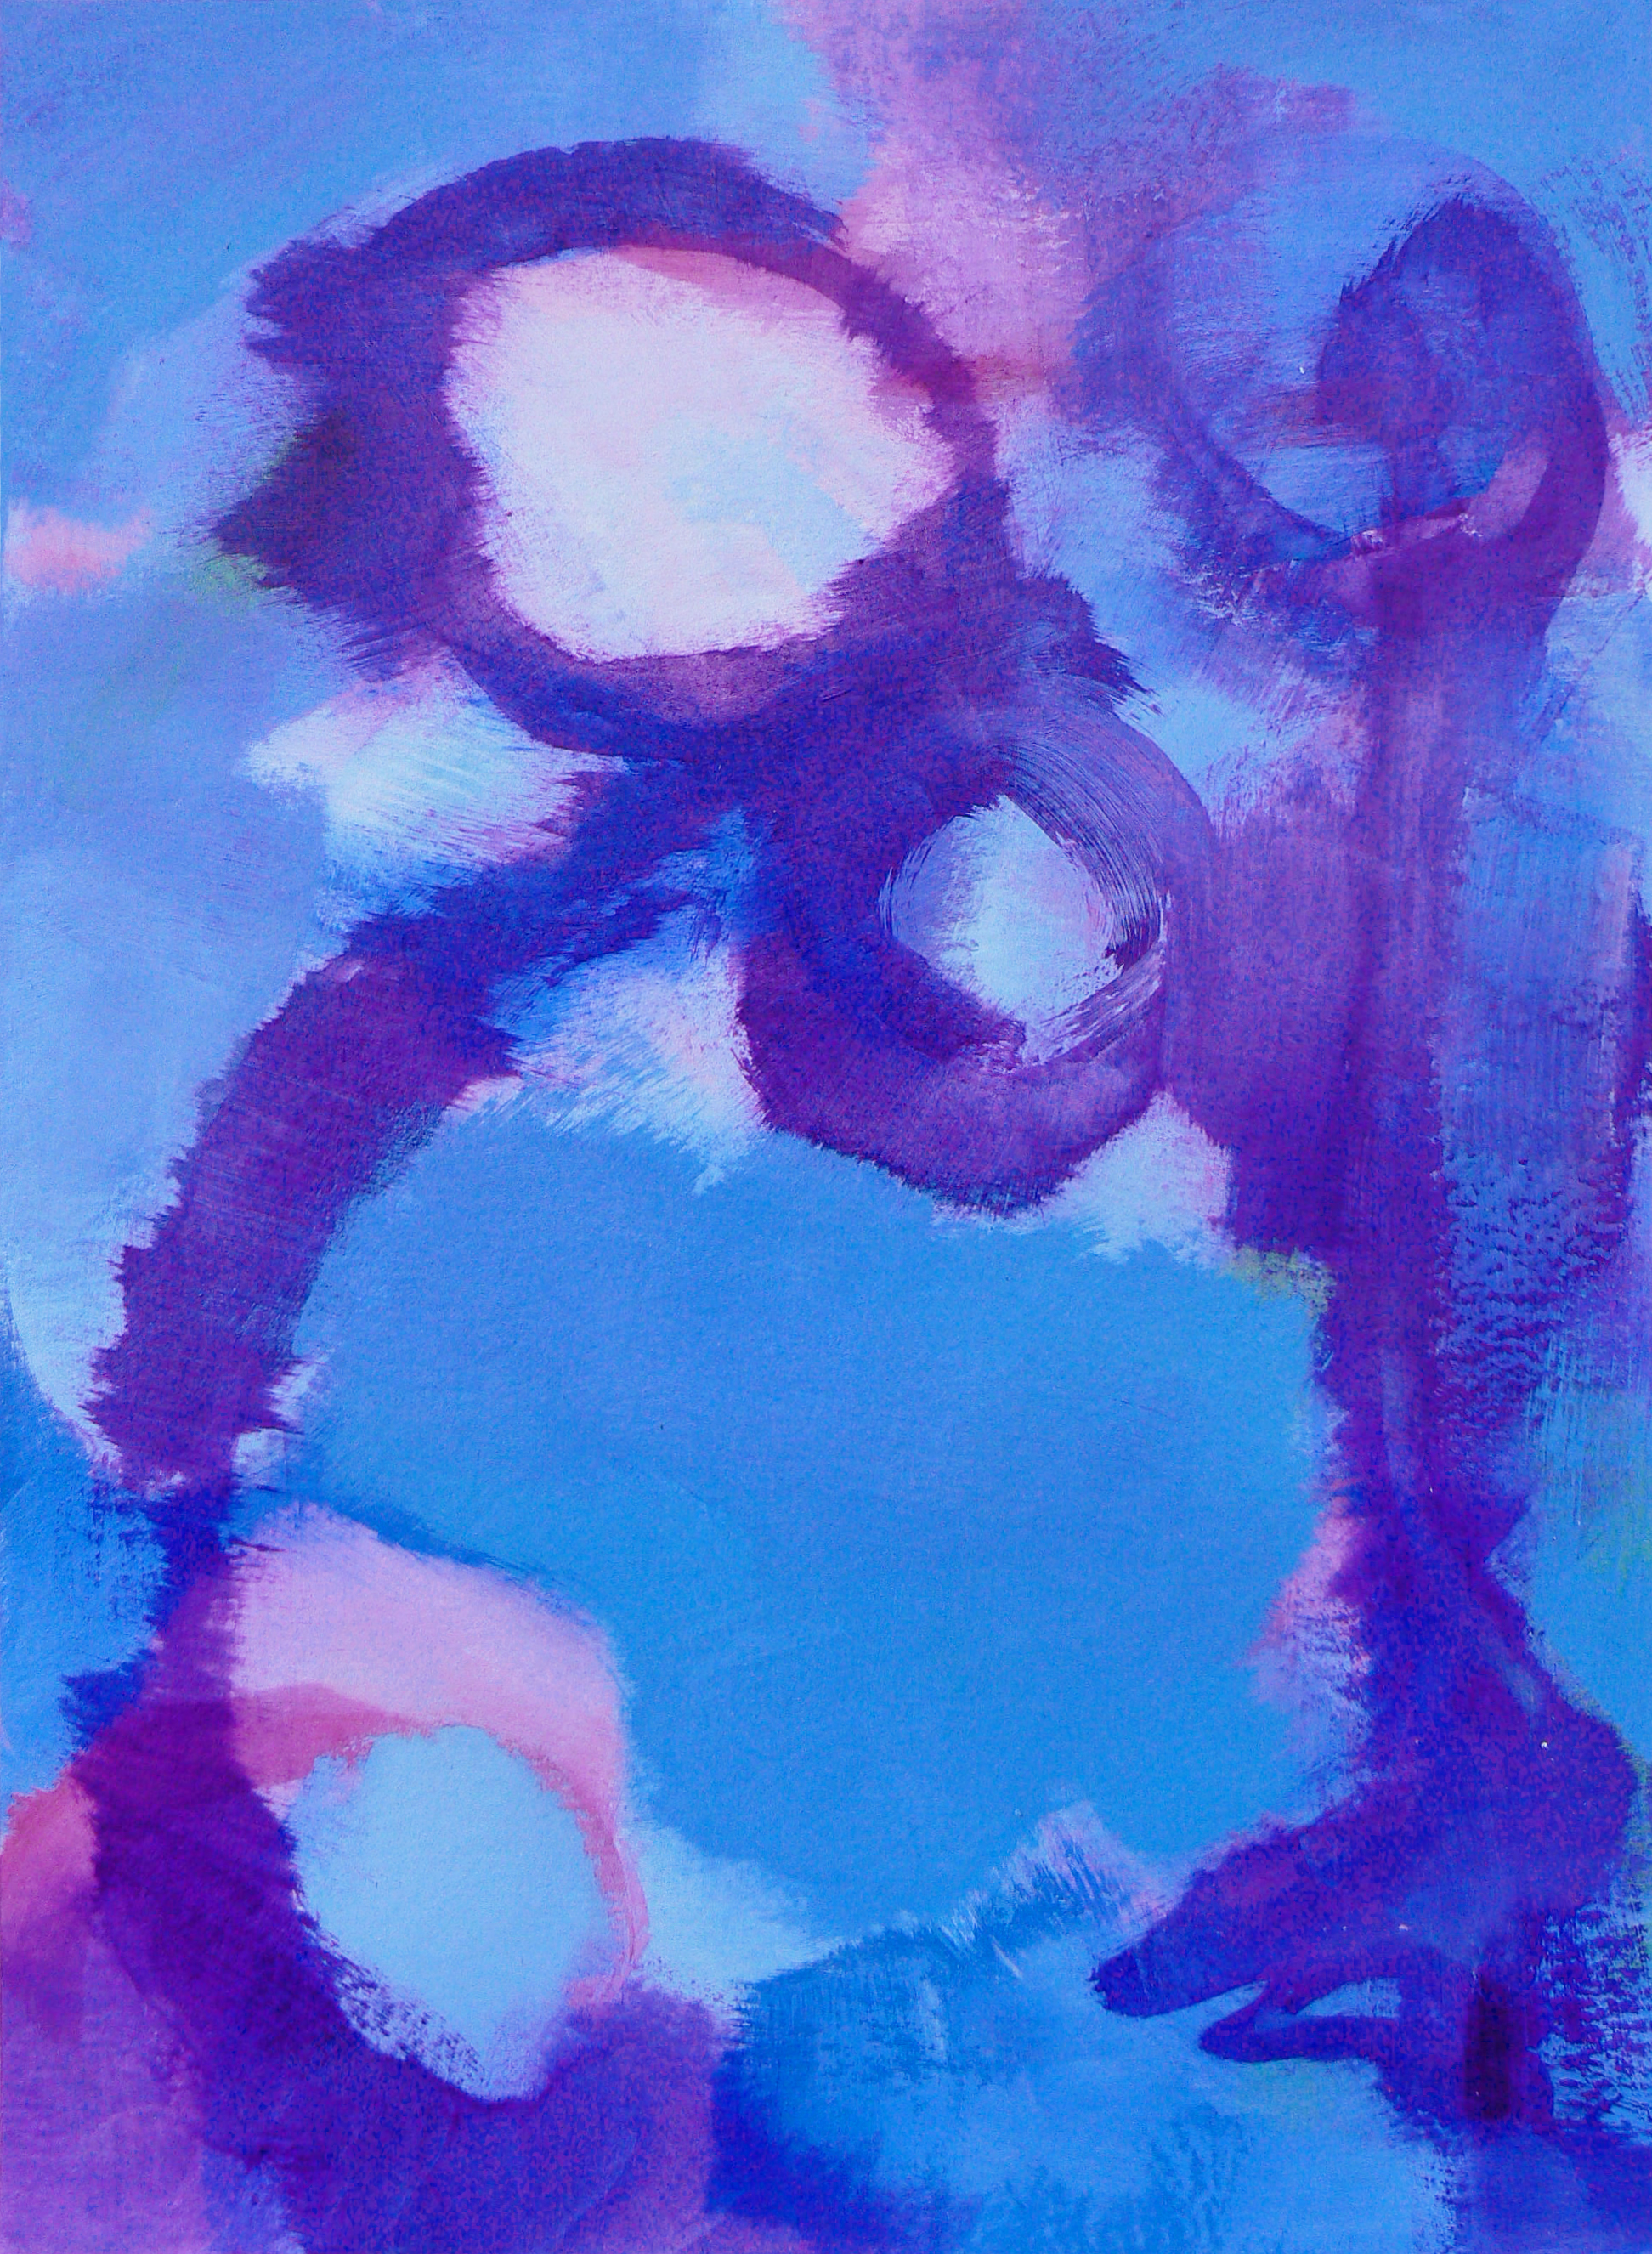 Out of the blue - original abstract painting